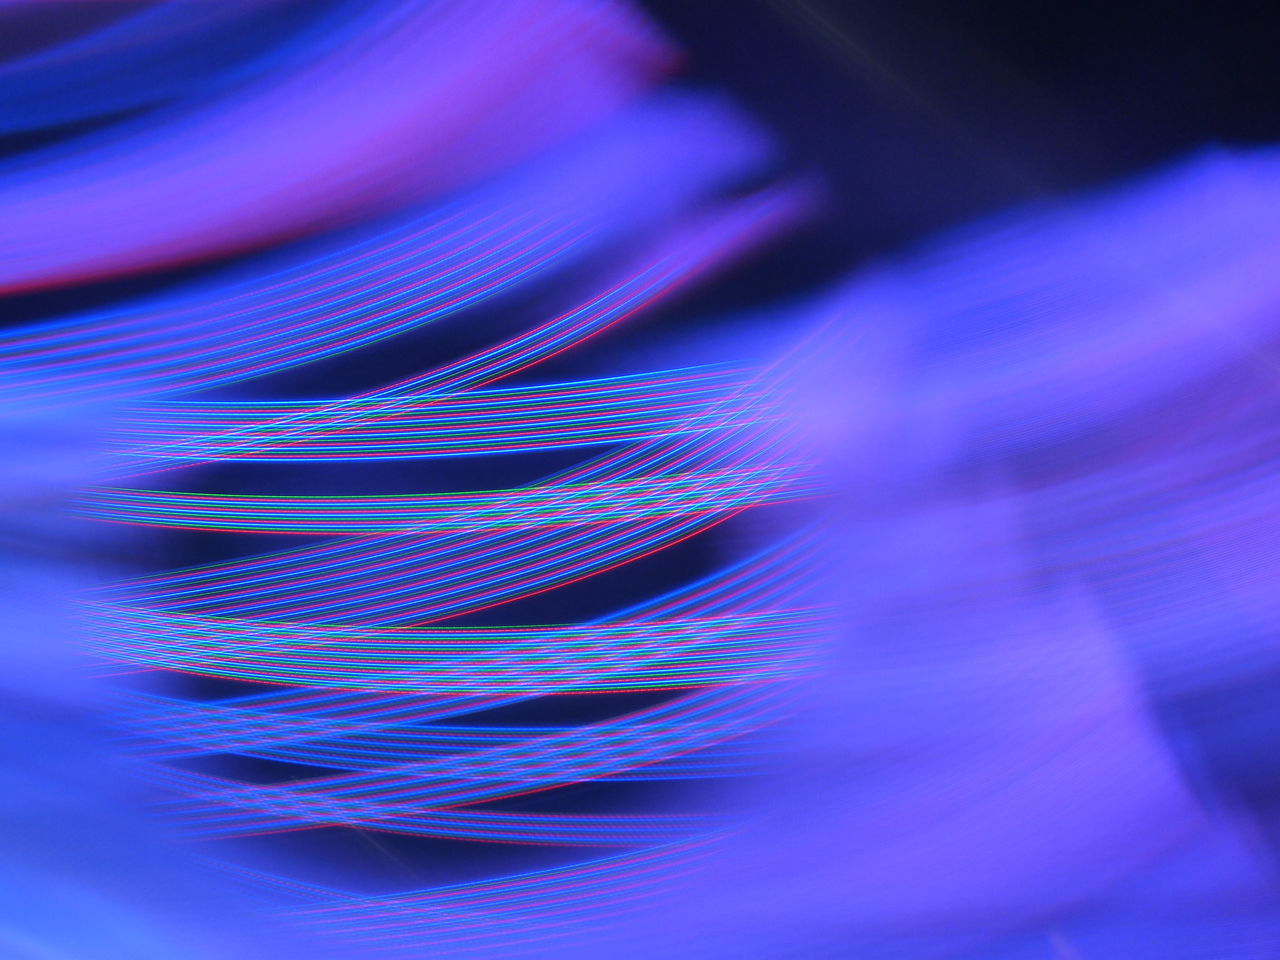 CLOSE-UP OF LIGHT PAINTING